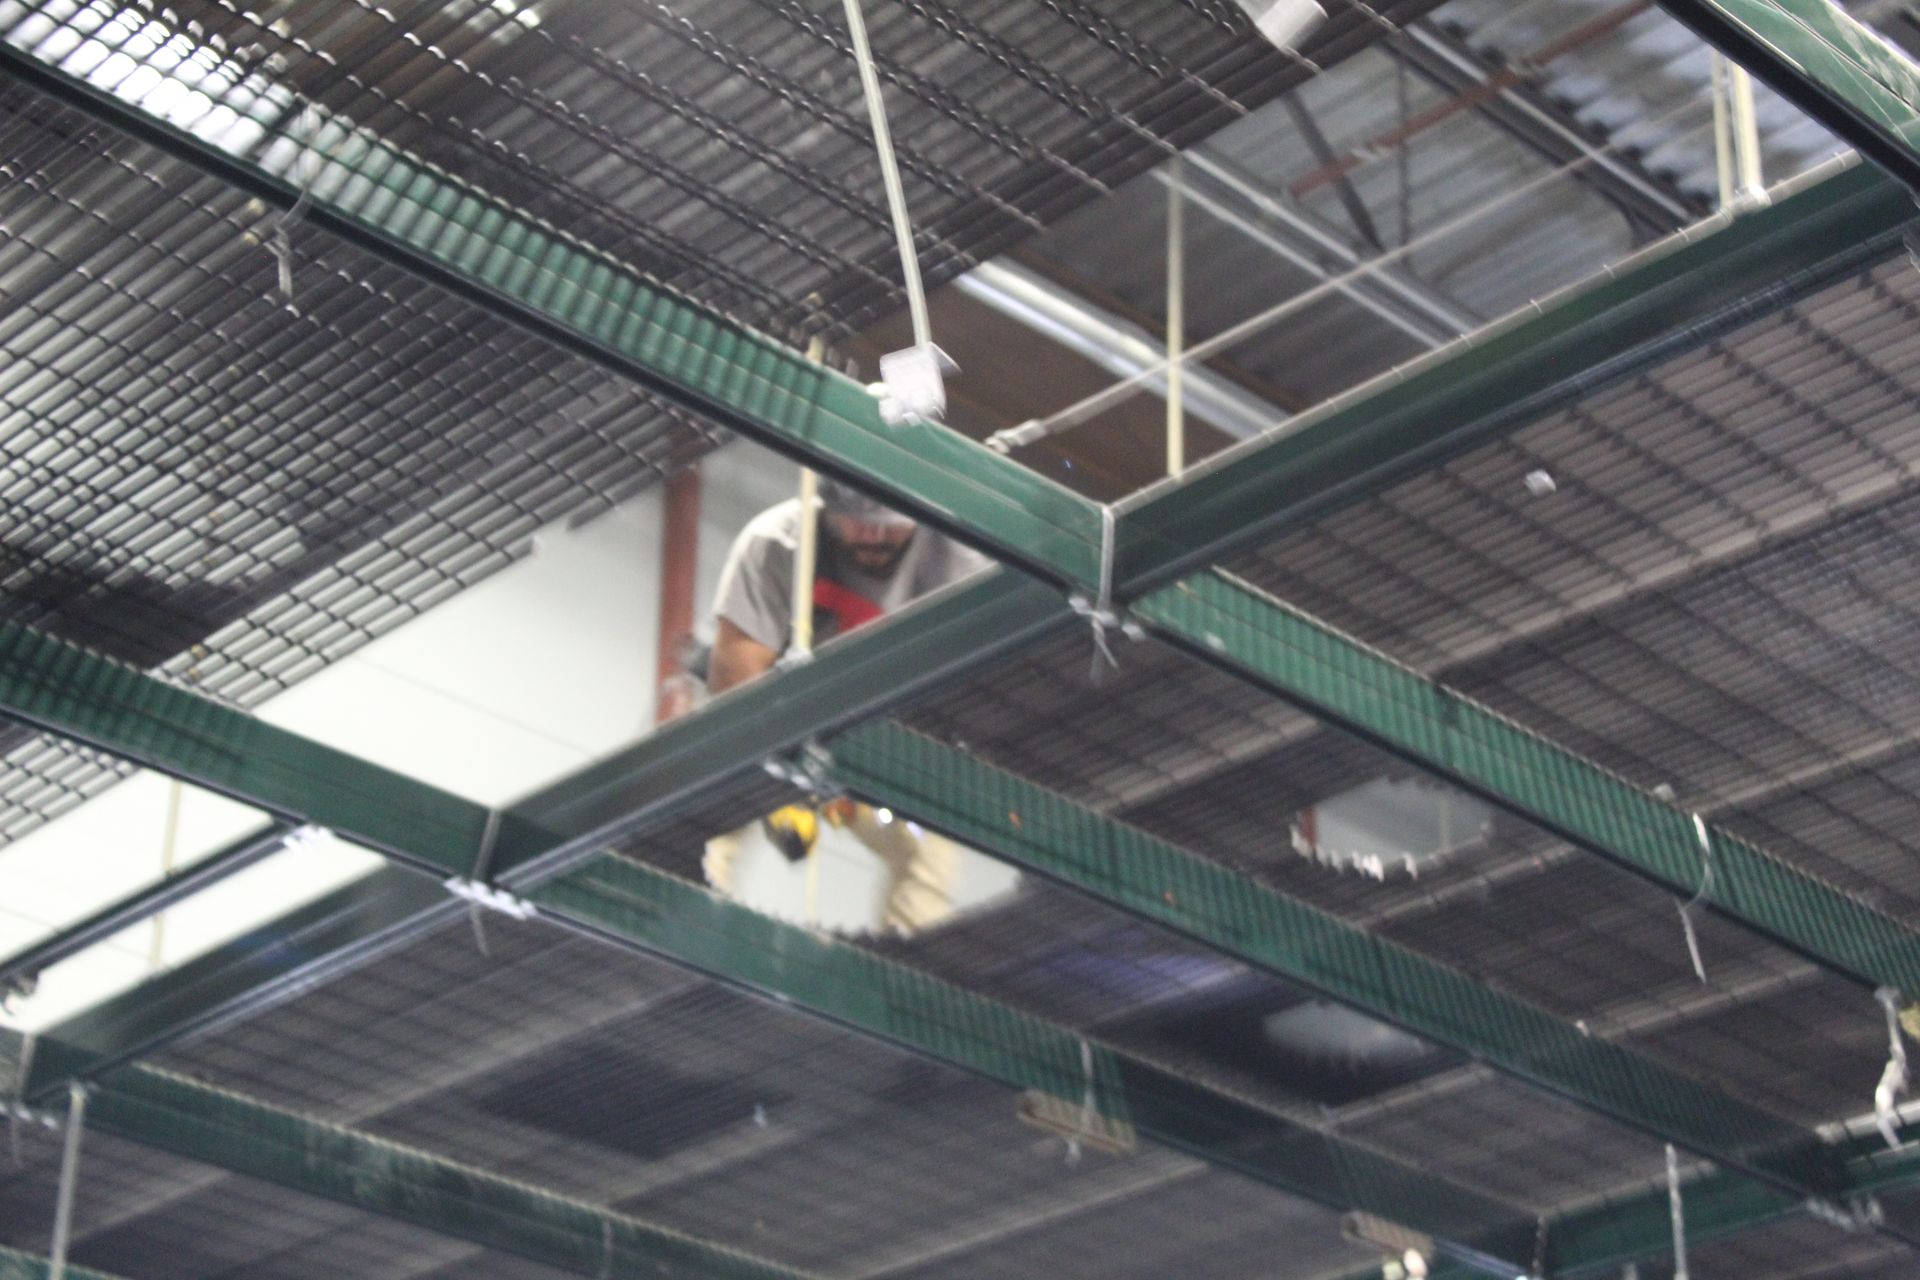 A man is working on removing pieces of the mezzanine  